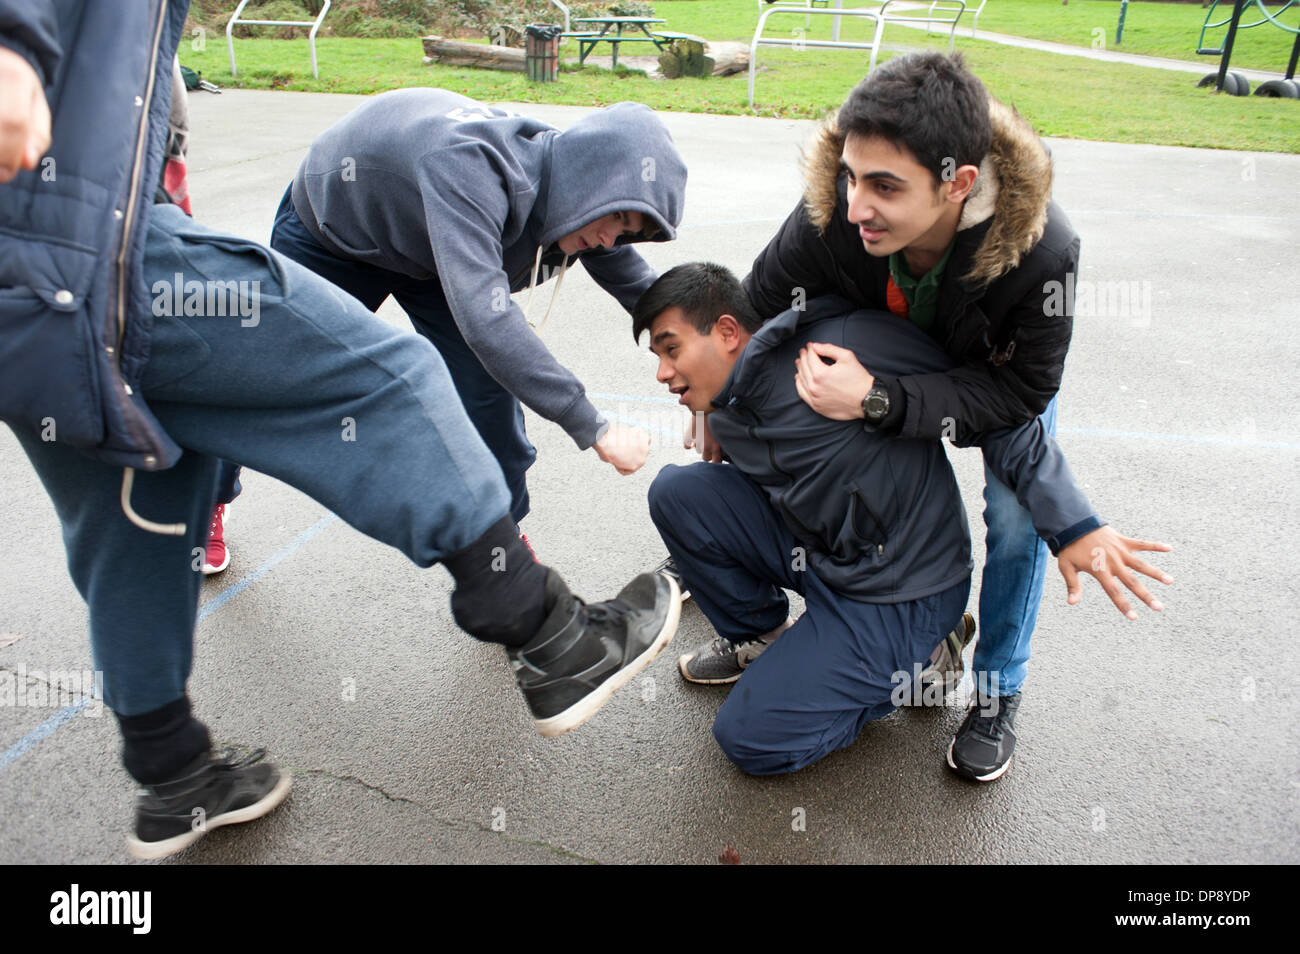 A teenage boy being assaulted by a group of boys. Stock Photo